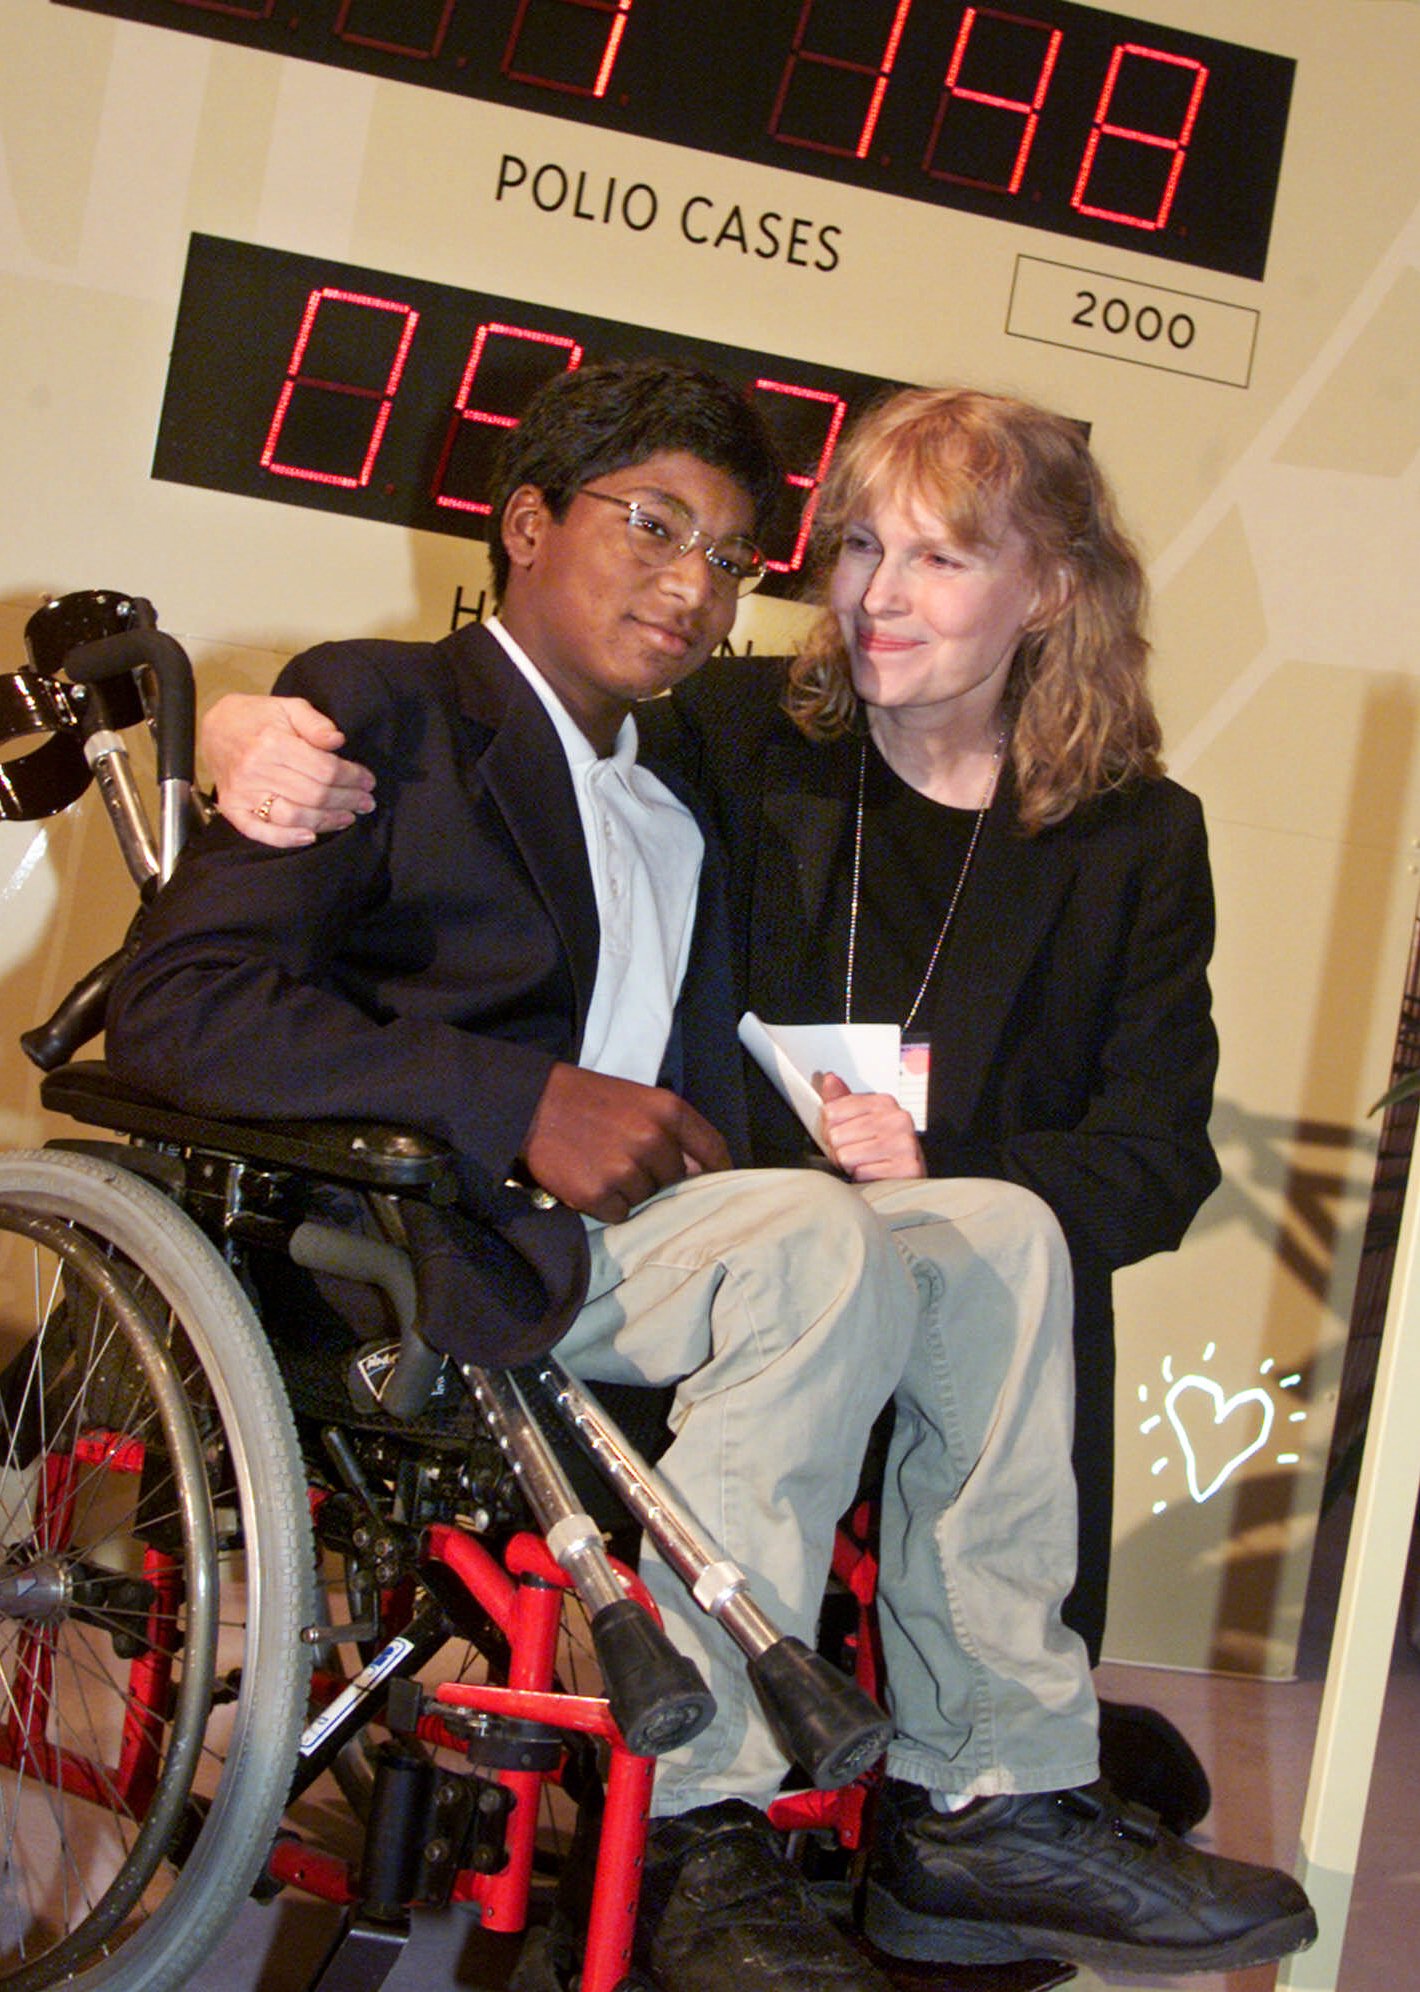 Actress Mia Farrow and her adopted son Thaddeus as they participate in the global summit on polio eradication, Sept. 27, 2000, at United Nations headquarters. (Richard Drew—AP)